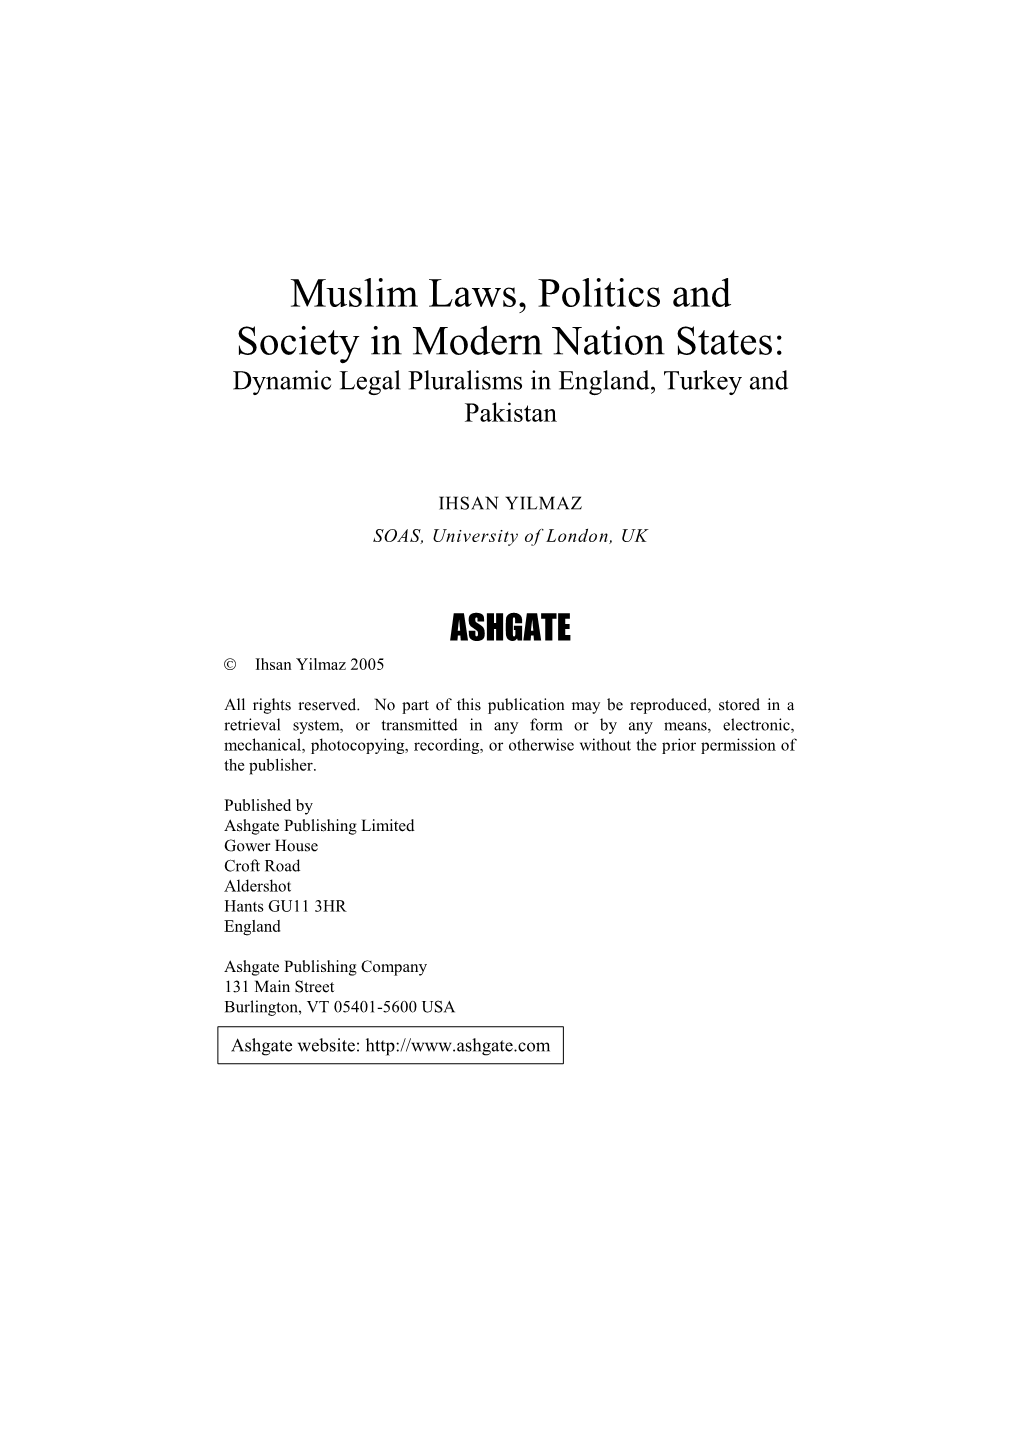 Dynamic Legal Pluralism and the Reconstruction of Unofficial Muslim Laws in England, Turkey and Pakistan